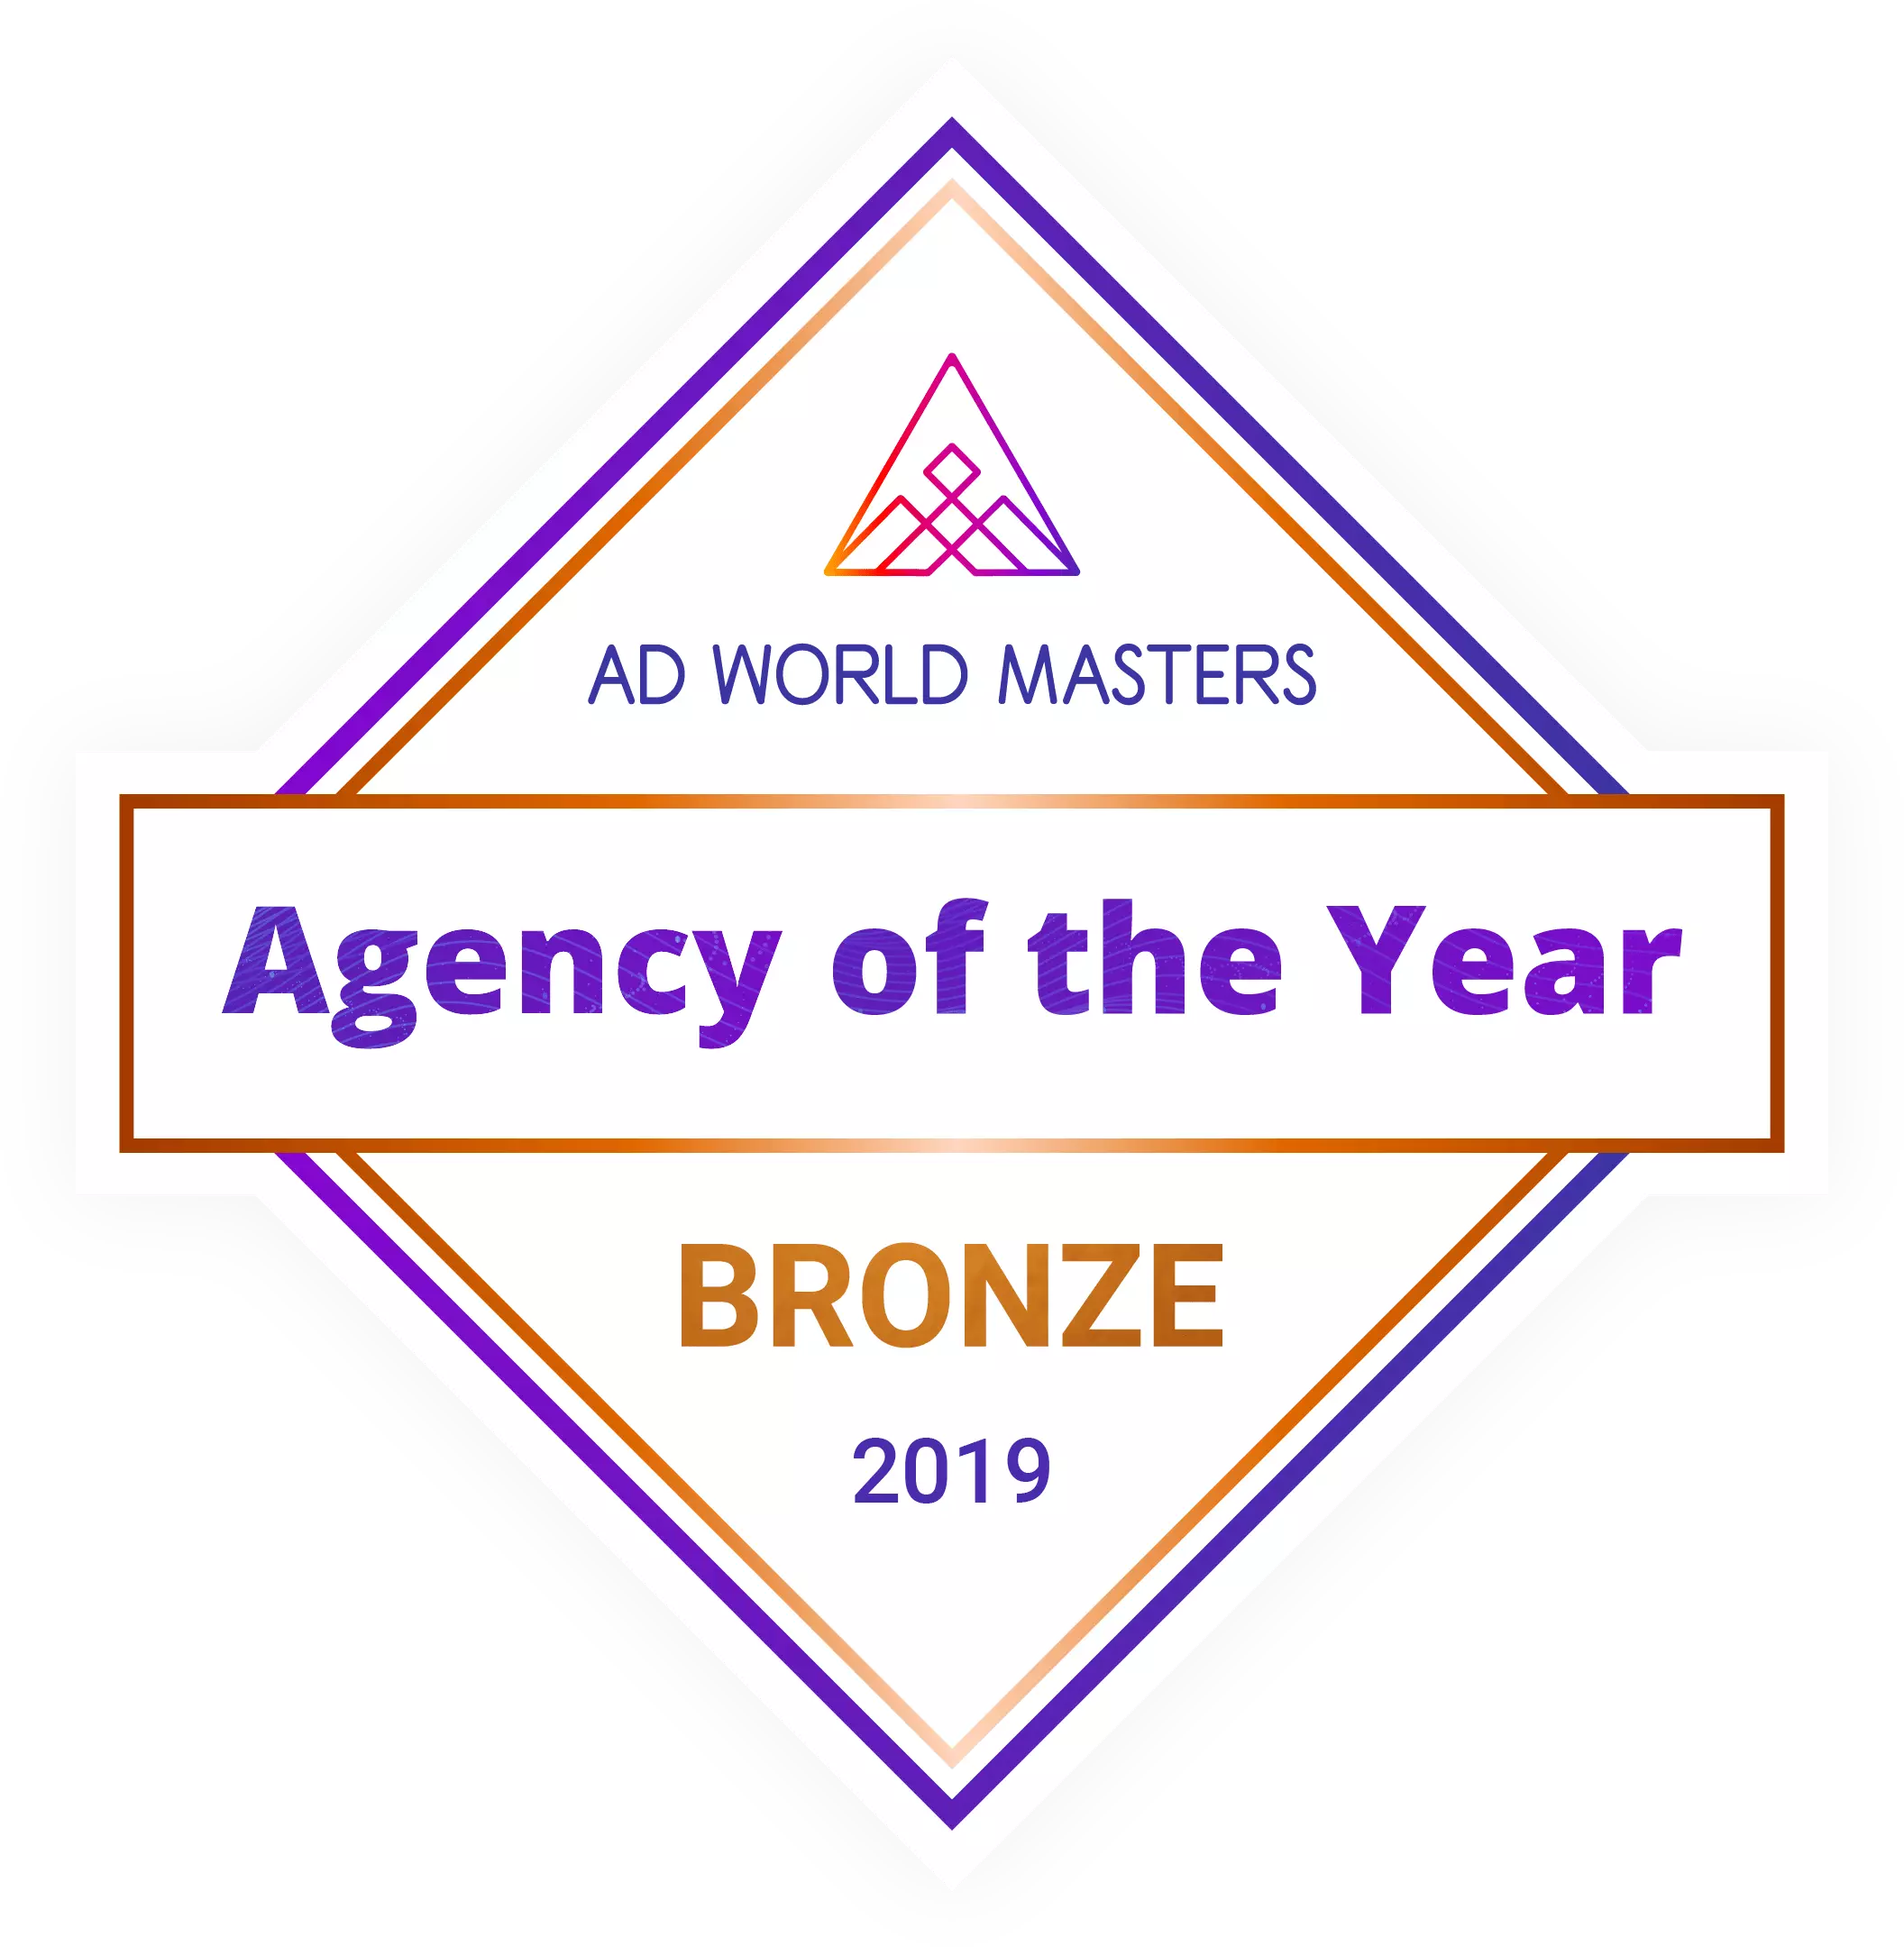 2019 Agency of the Year
Bronze Winner for 2019 Agency of the Year Awards by Ad World Masters
etc